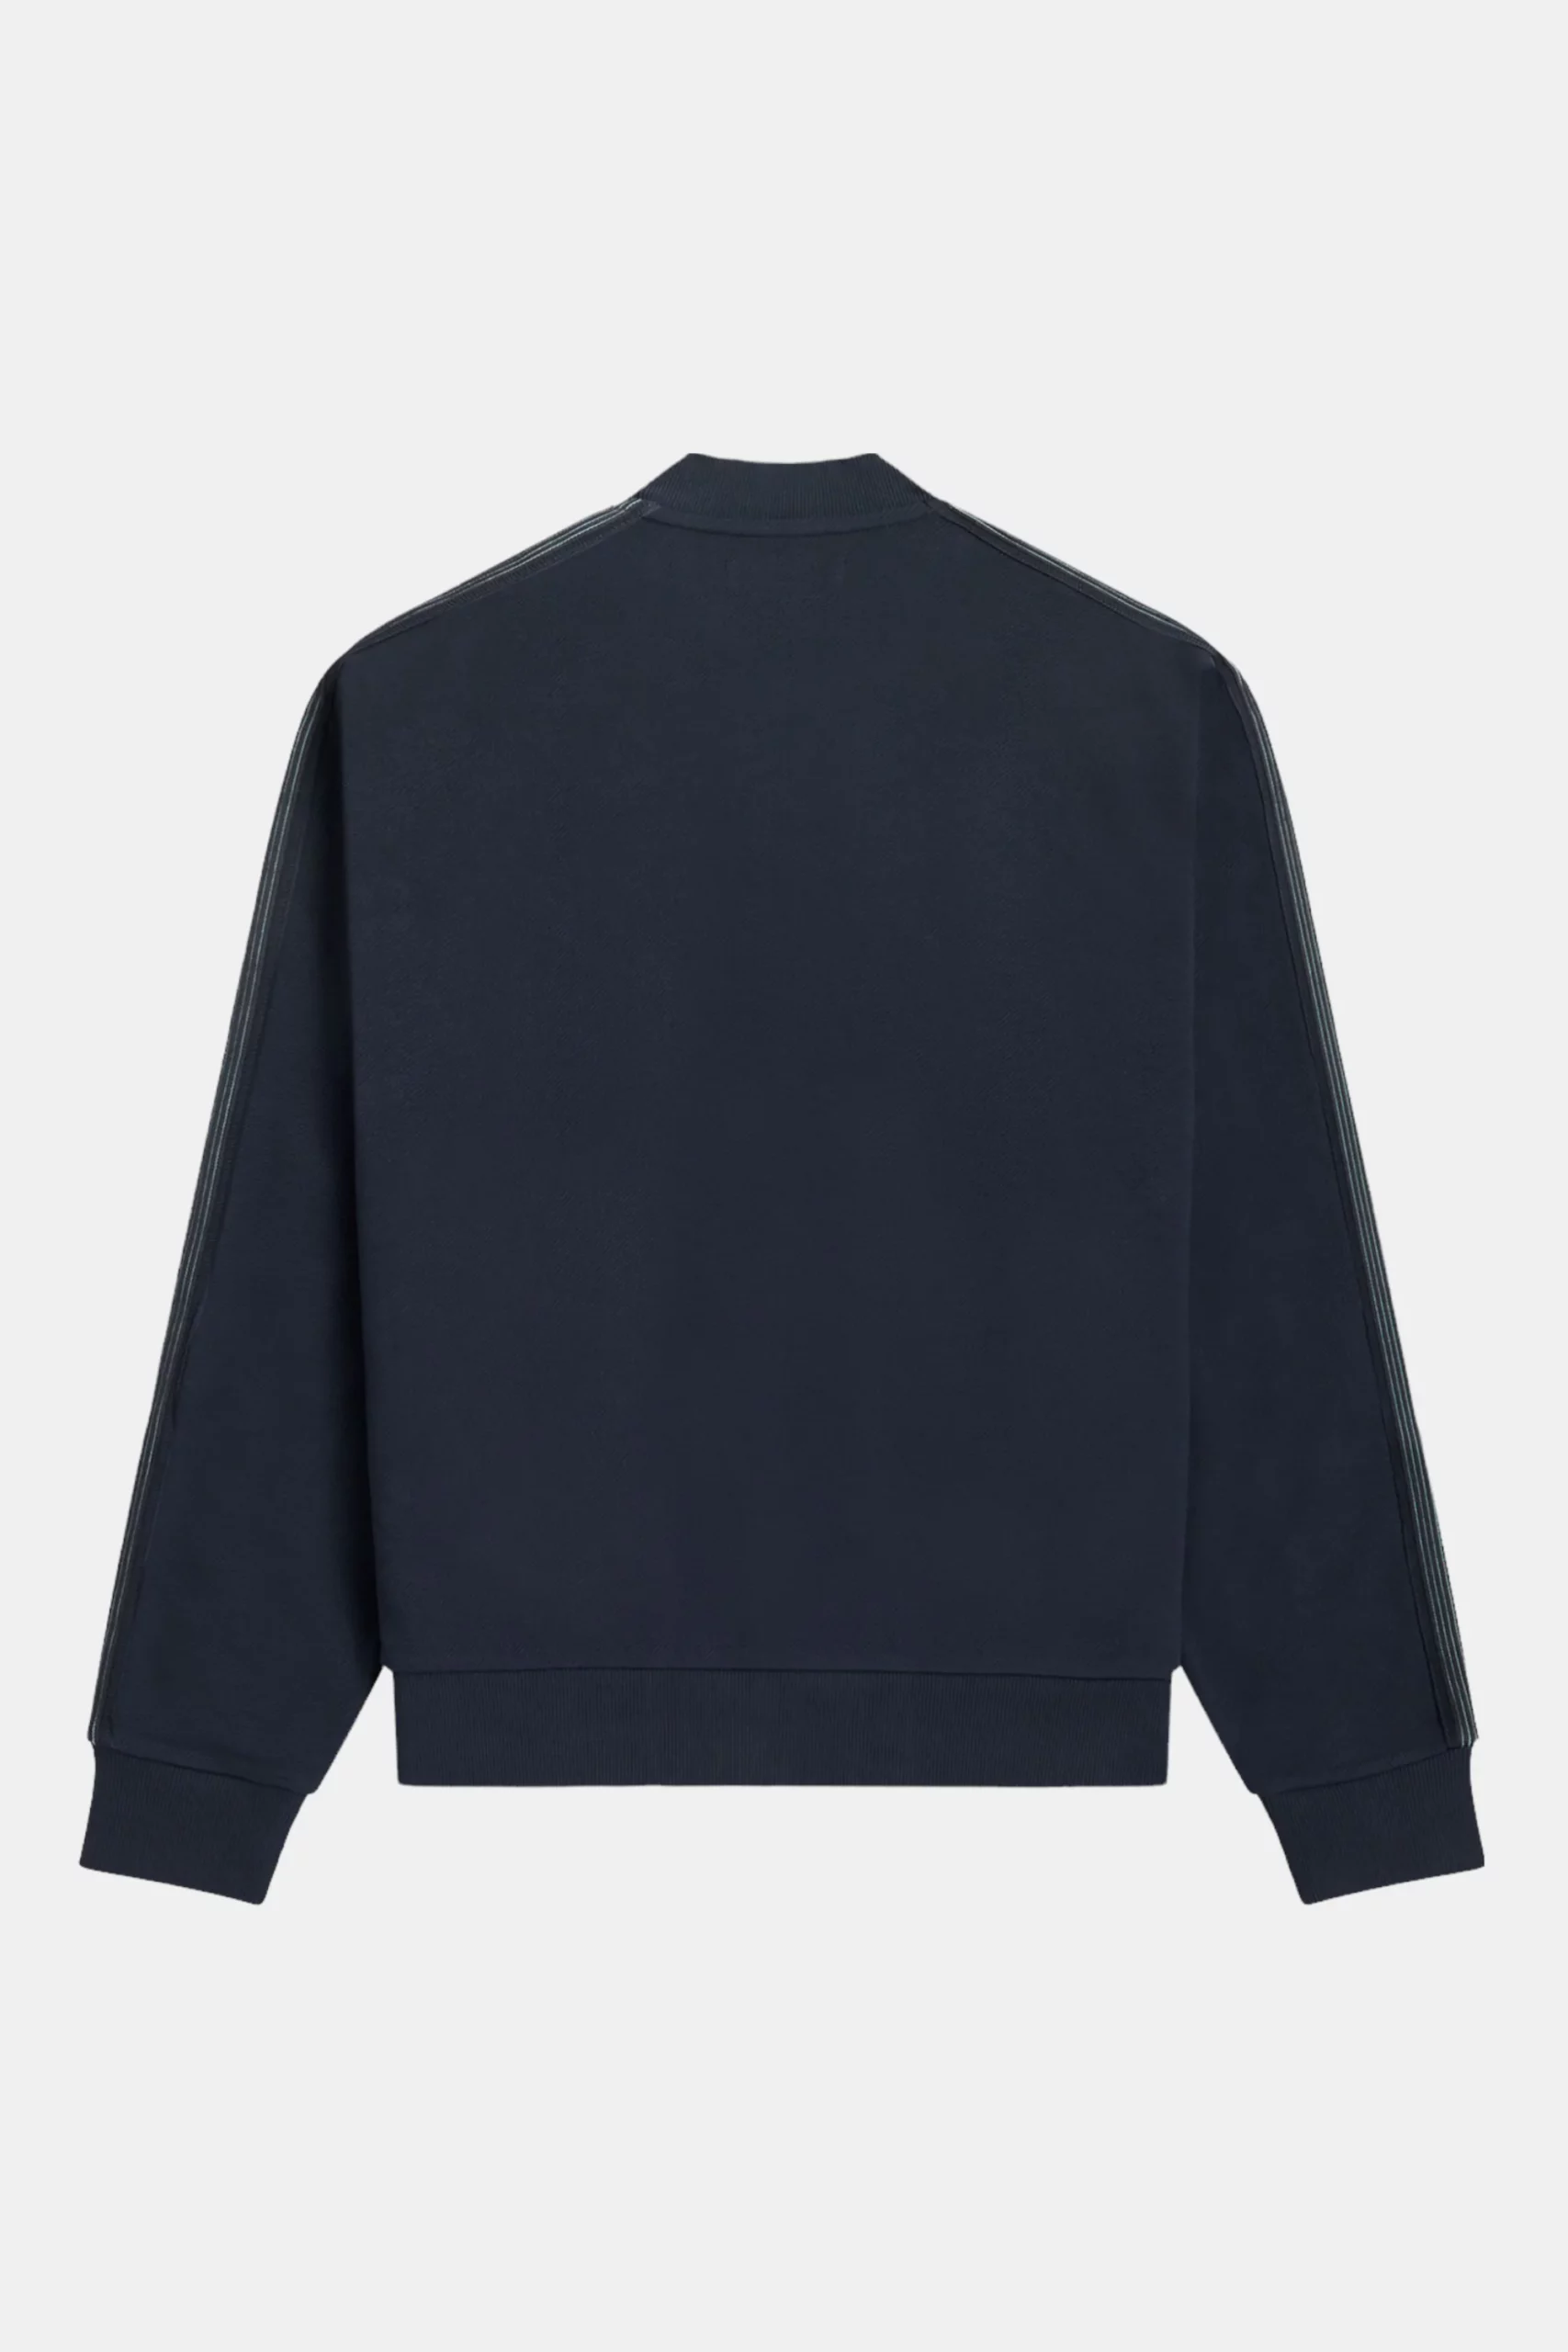 olimpijka fred perry knitted taped shaded navy 2